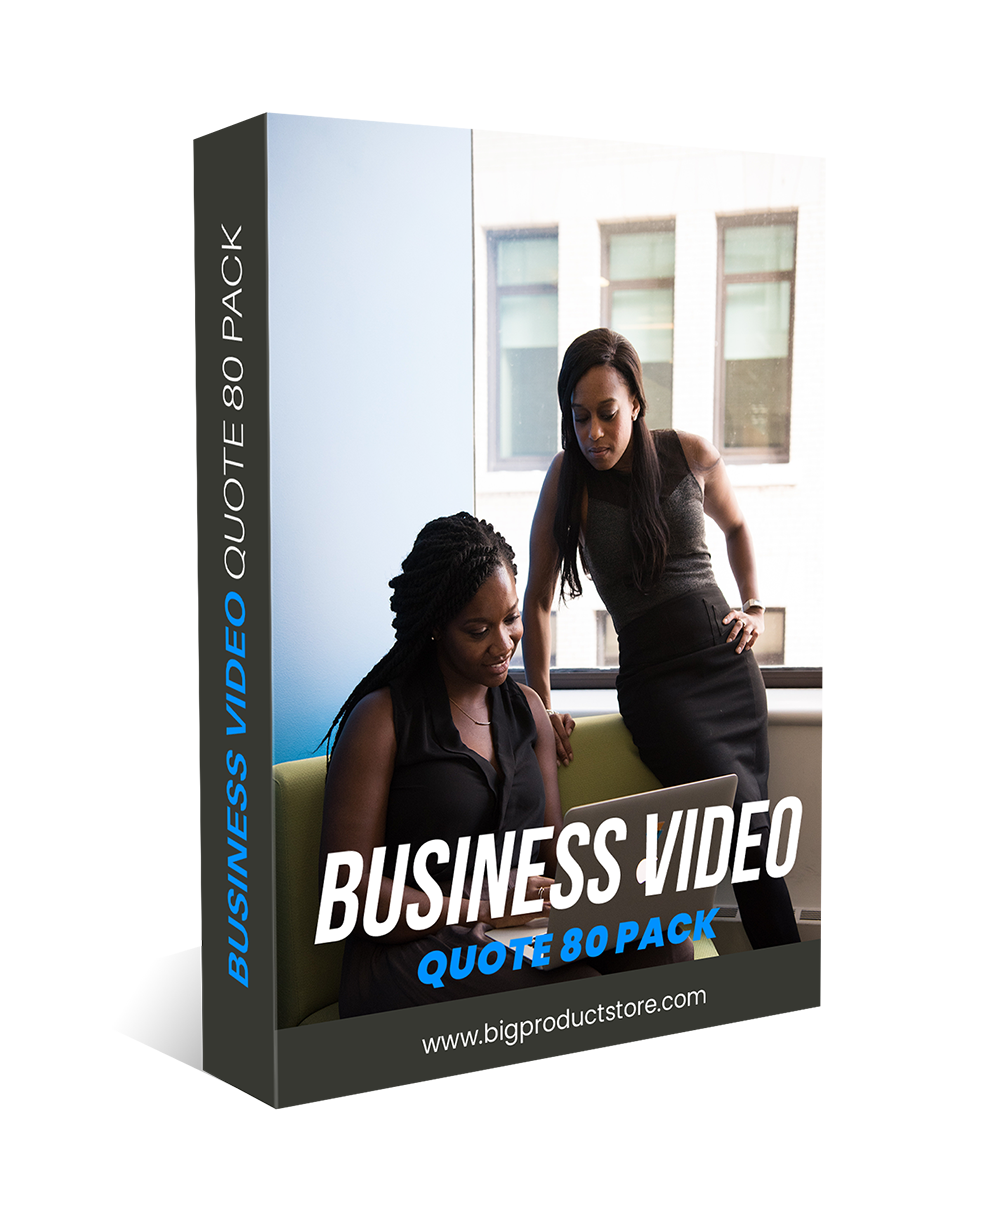 business-video-quote-80-pack-bigproductstore